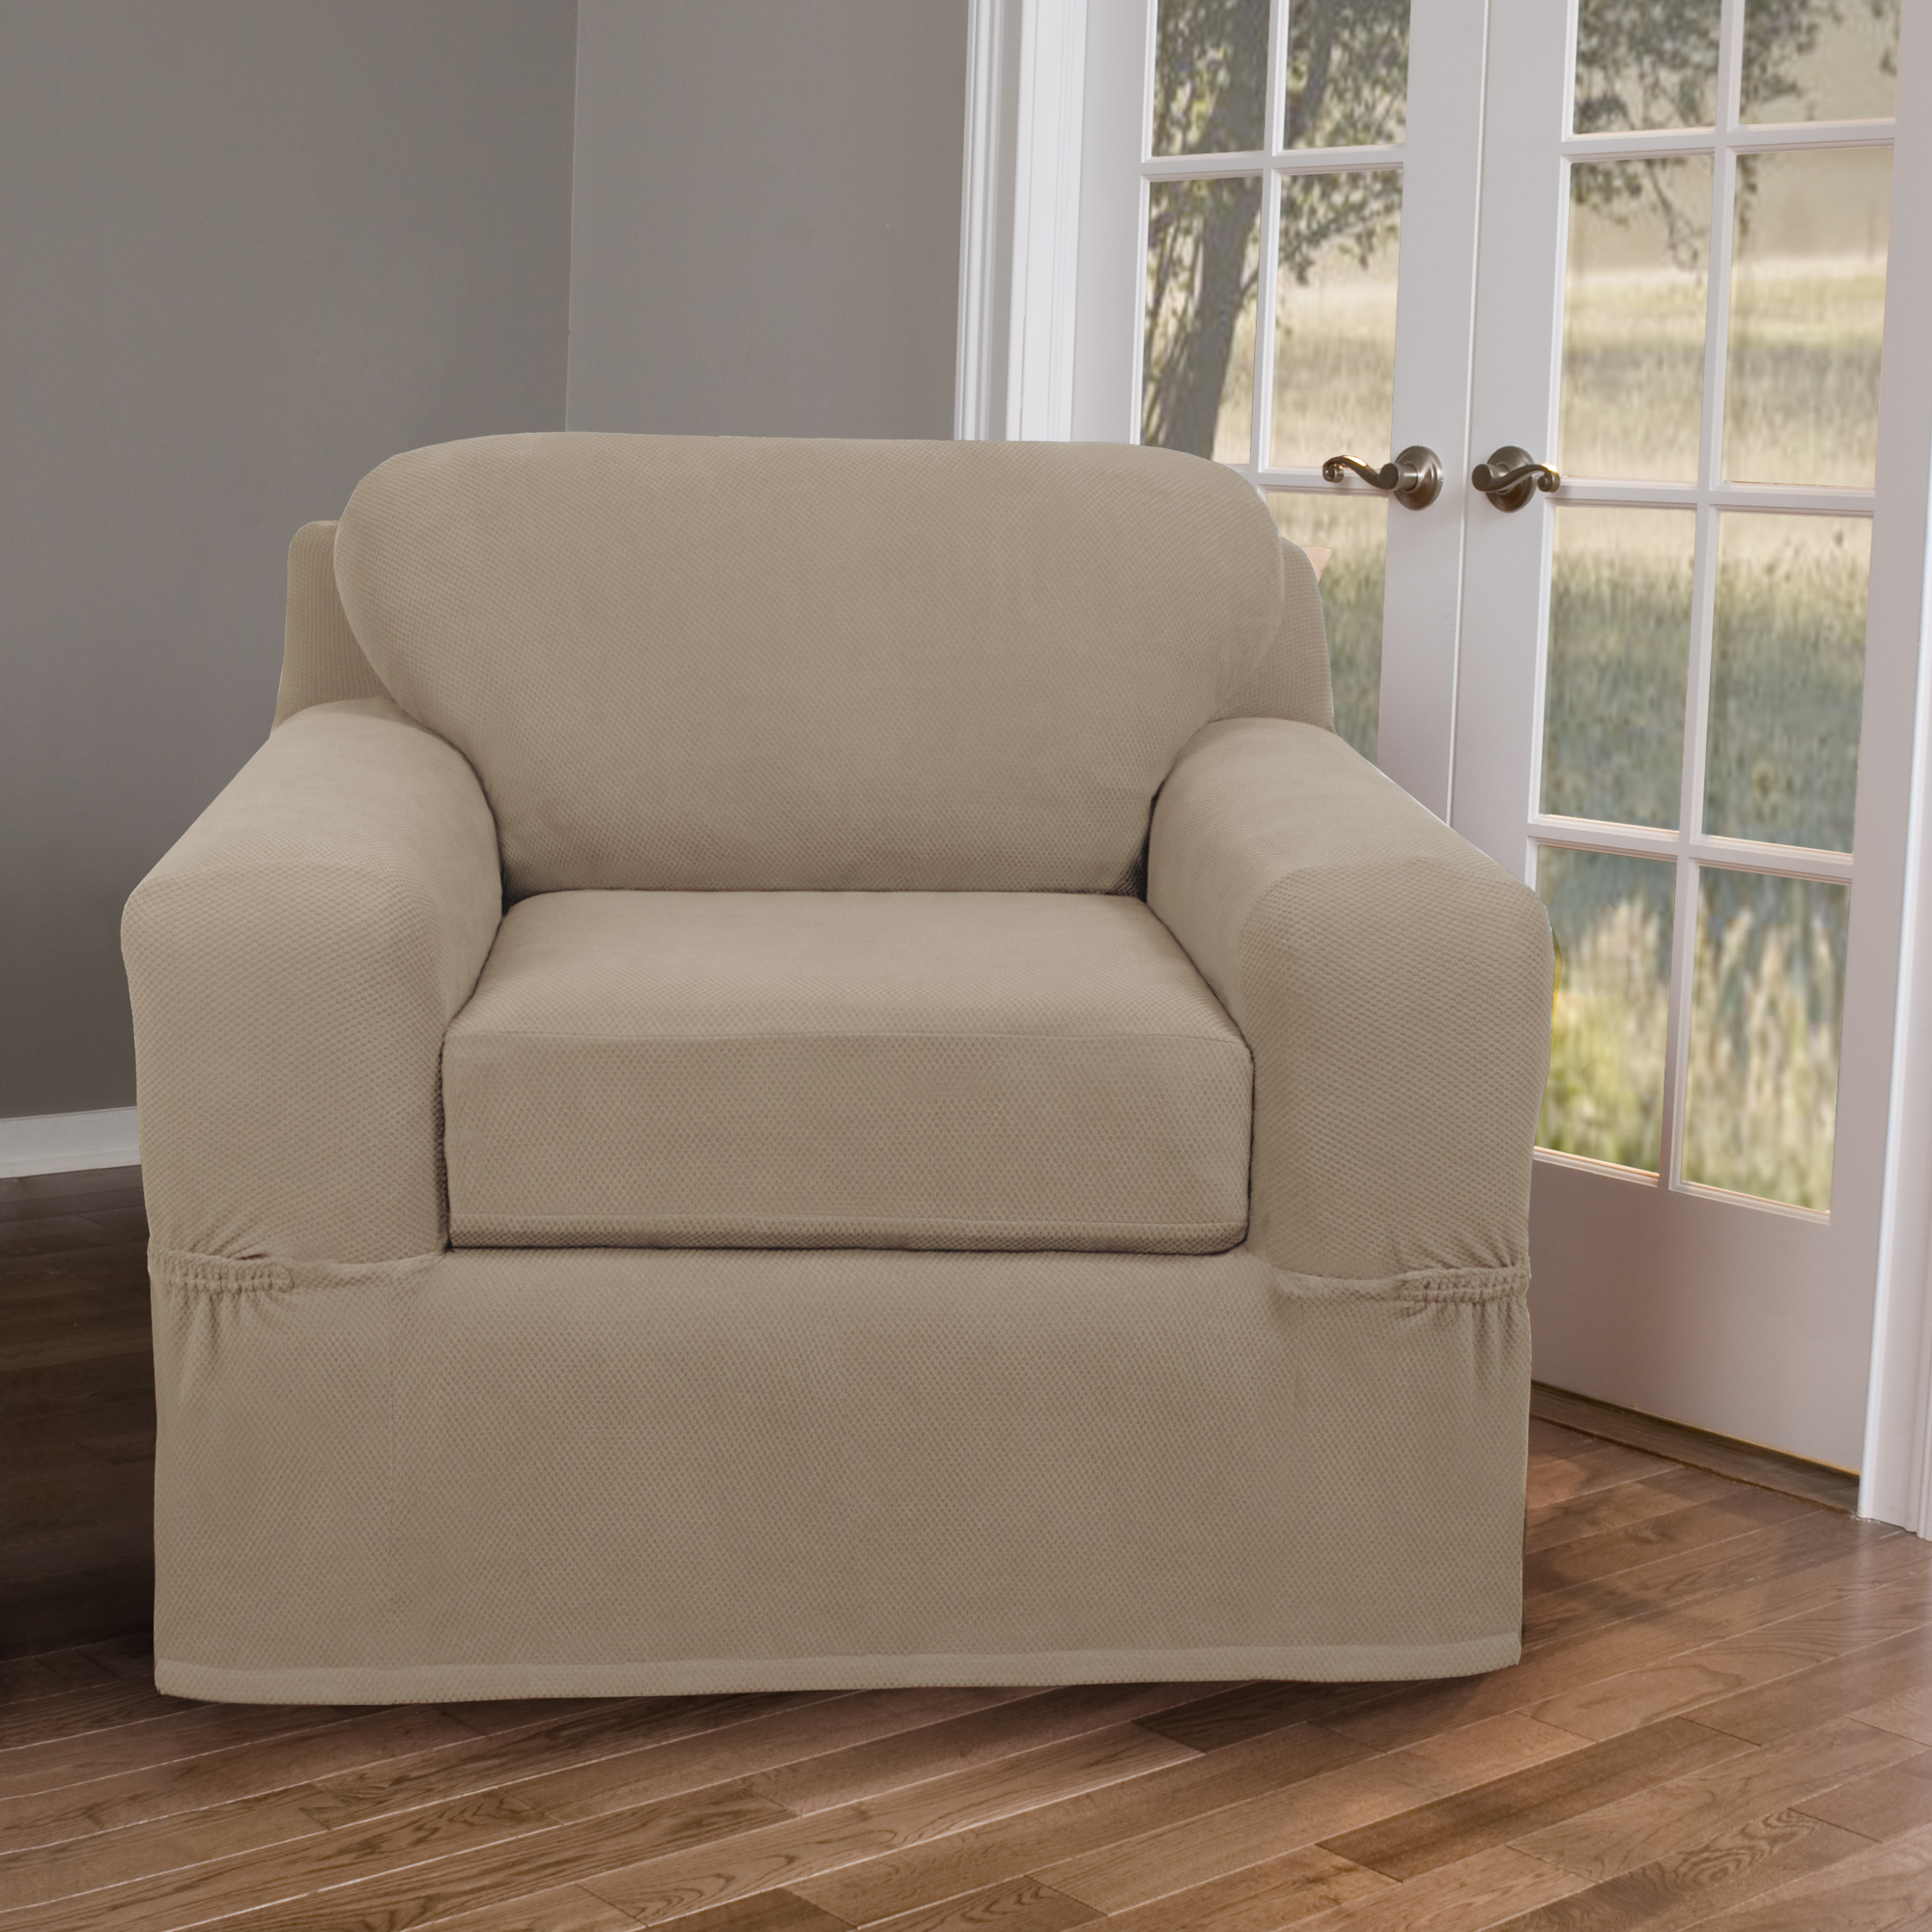 Zenna Home Pixel Stretch Furniture Cover/Slipcover Chair, 2 -Piece - image 2 of 7